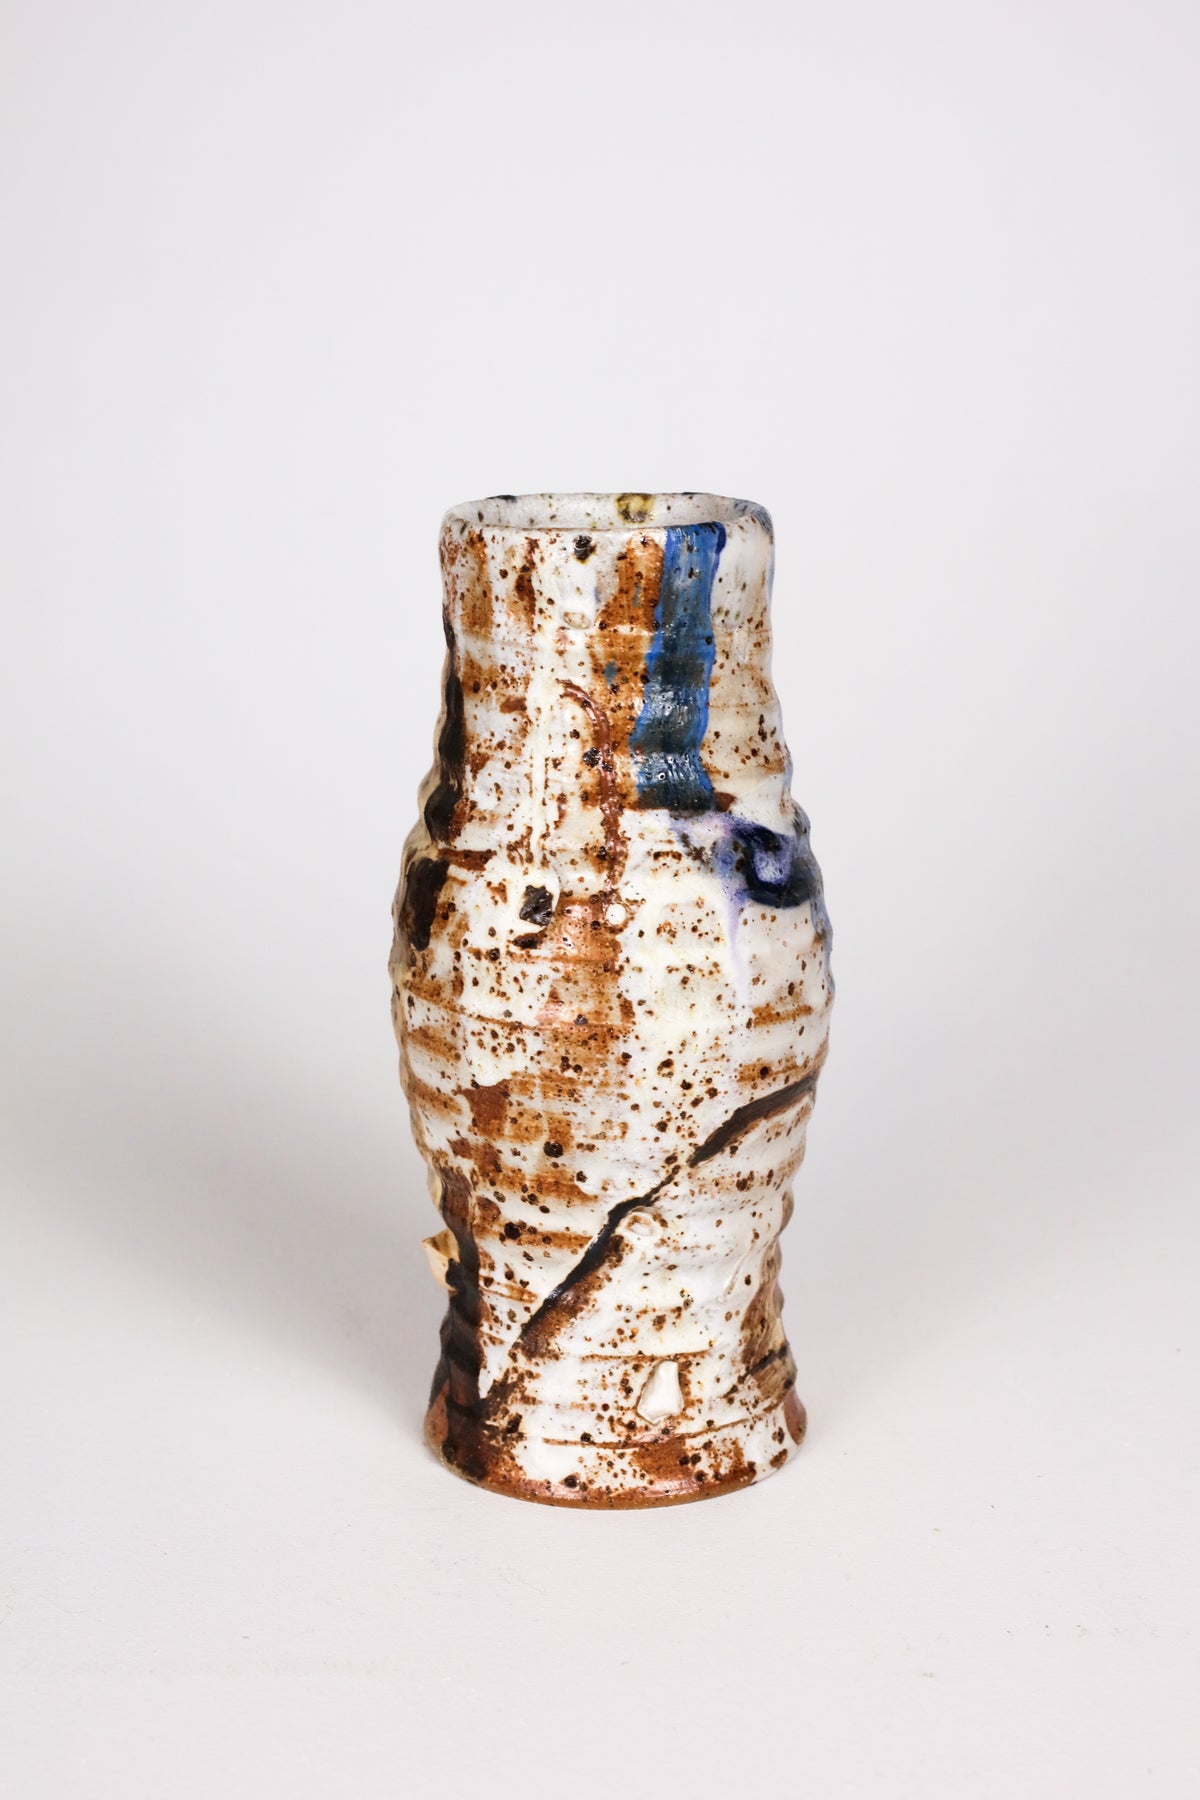 Peta Armstrong | Valley Entry Vessel